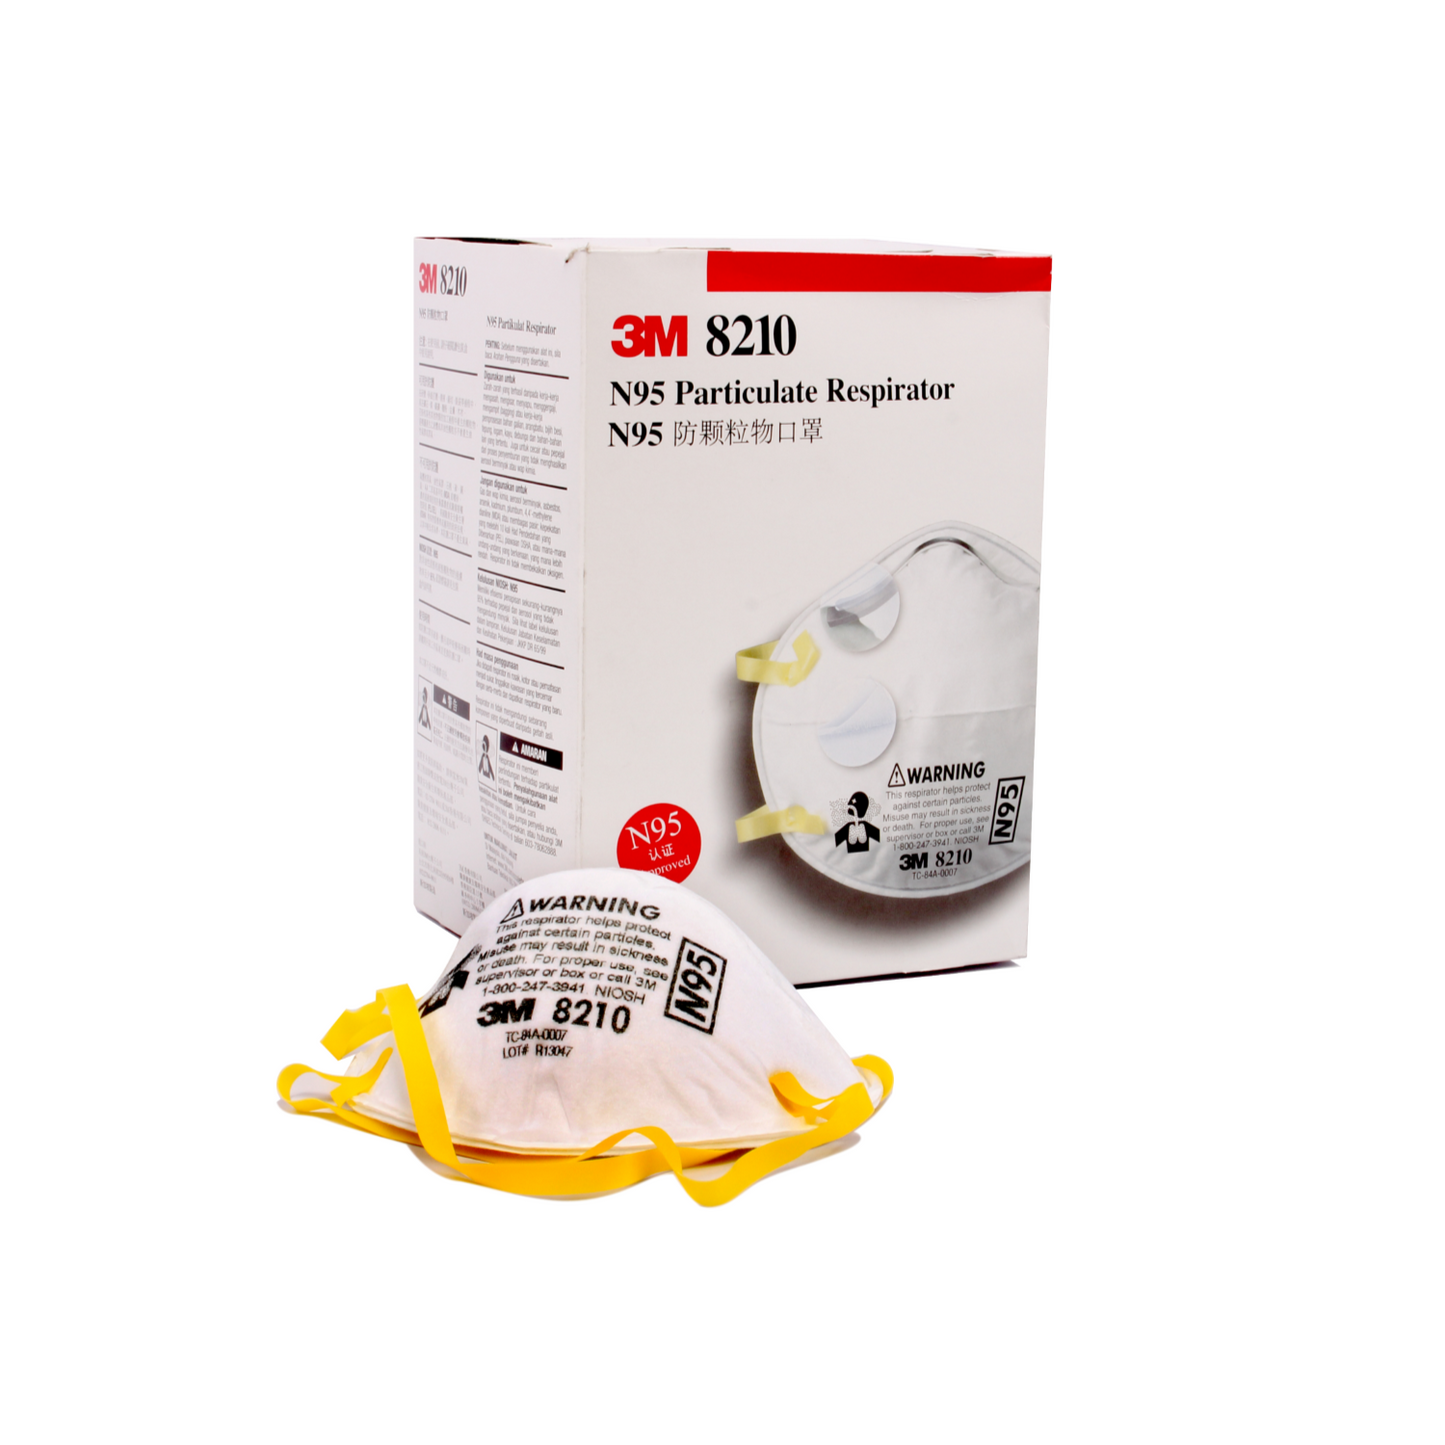 3M N95 Mask #8210 - N95 respiratory mask for protection.